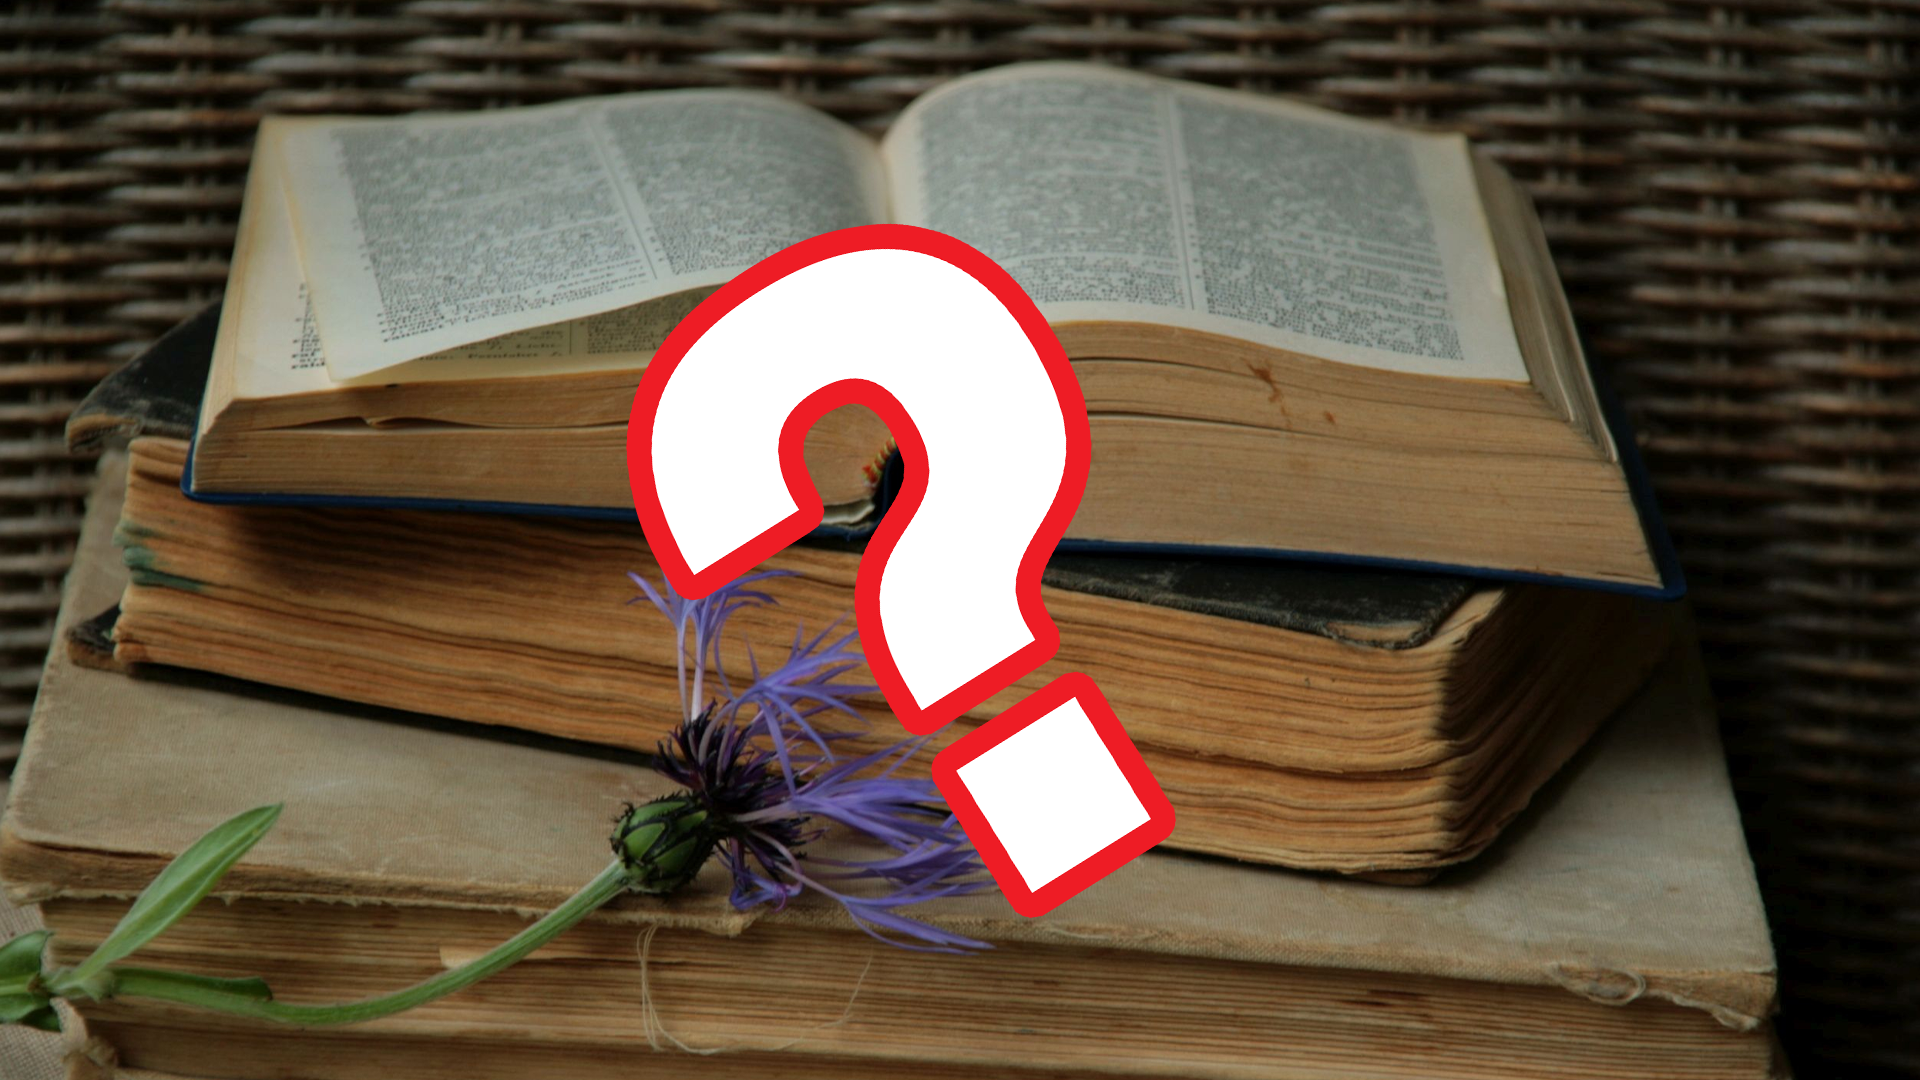 Old books and flowers with question mark